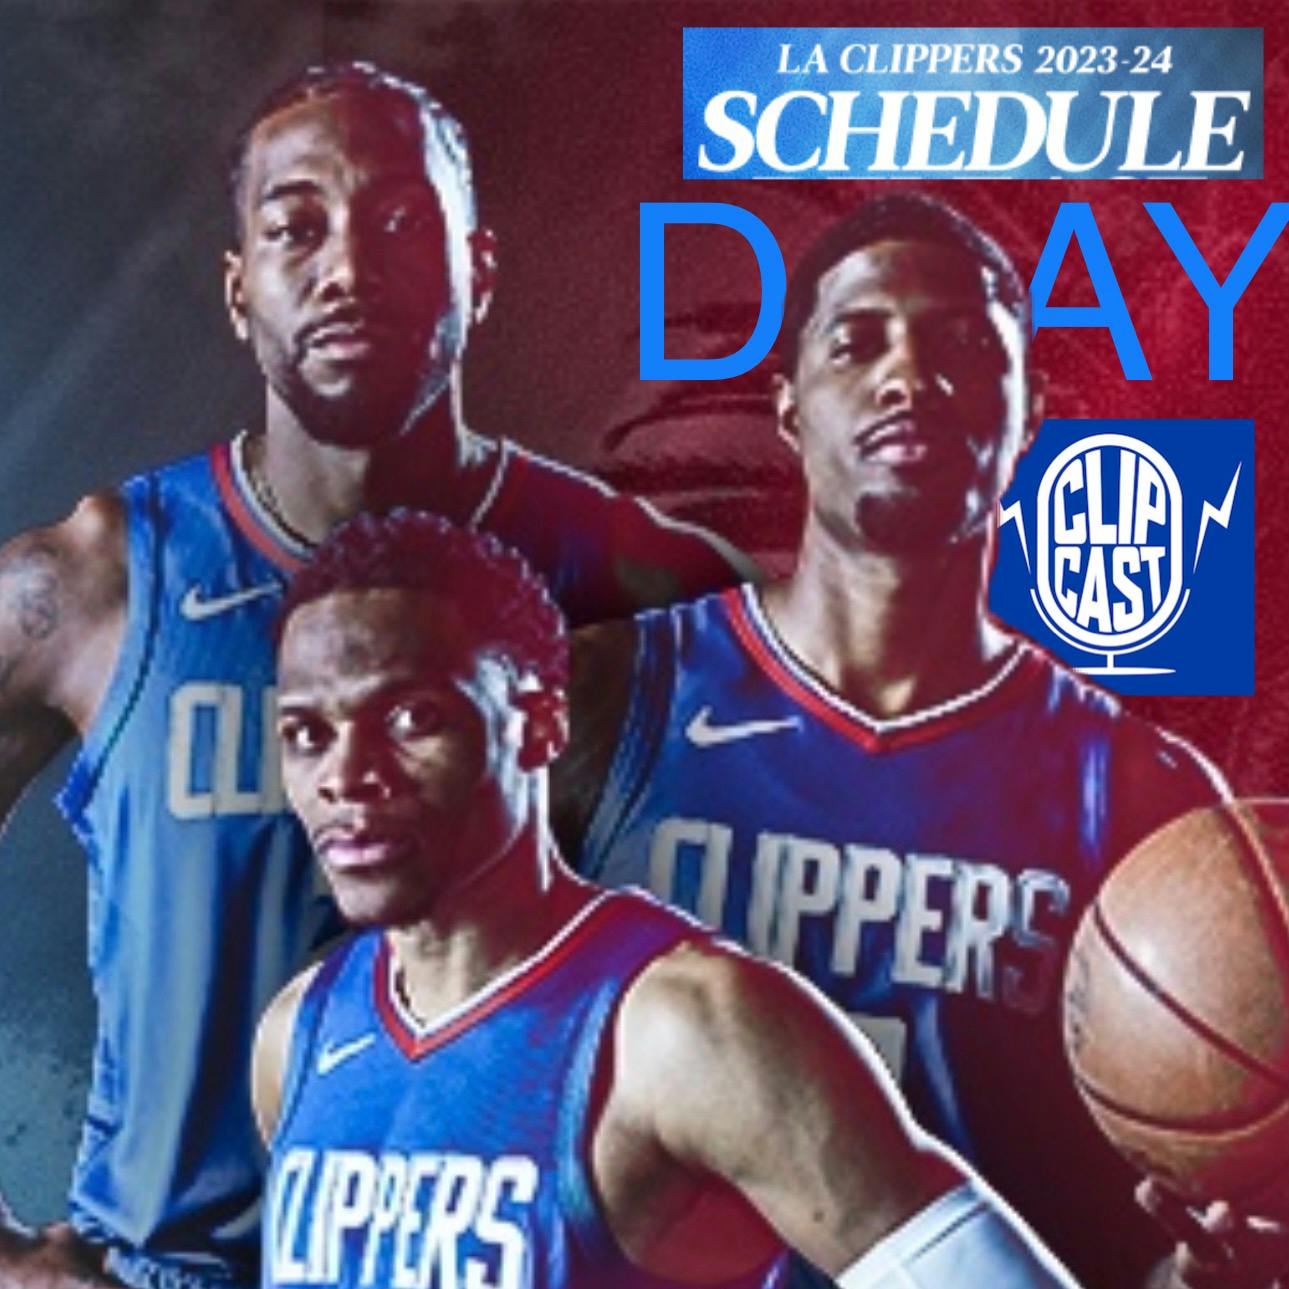 LA Clippers 2023-24 SCHEDULE DAY